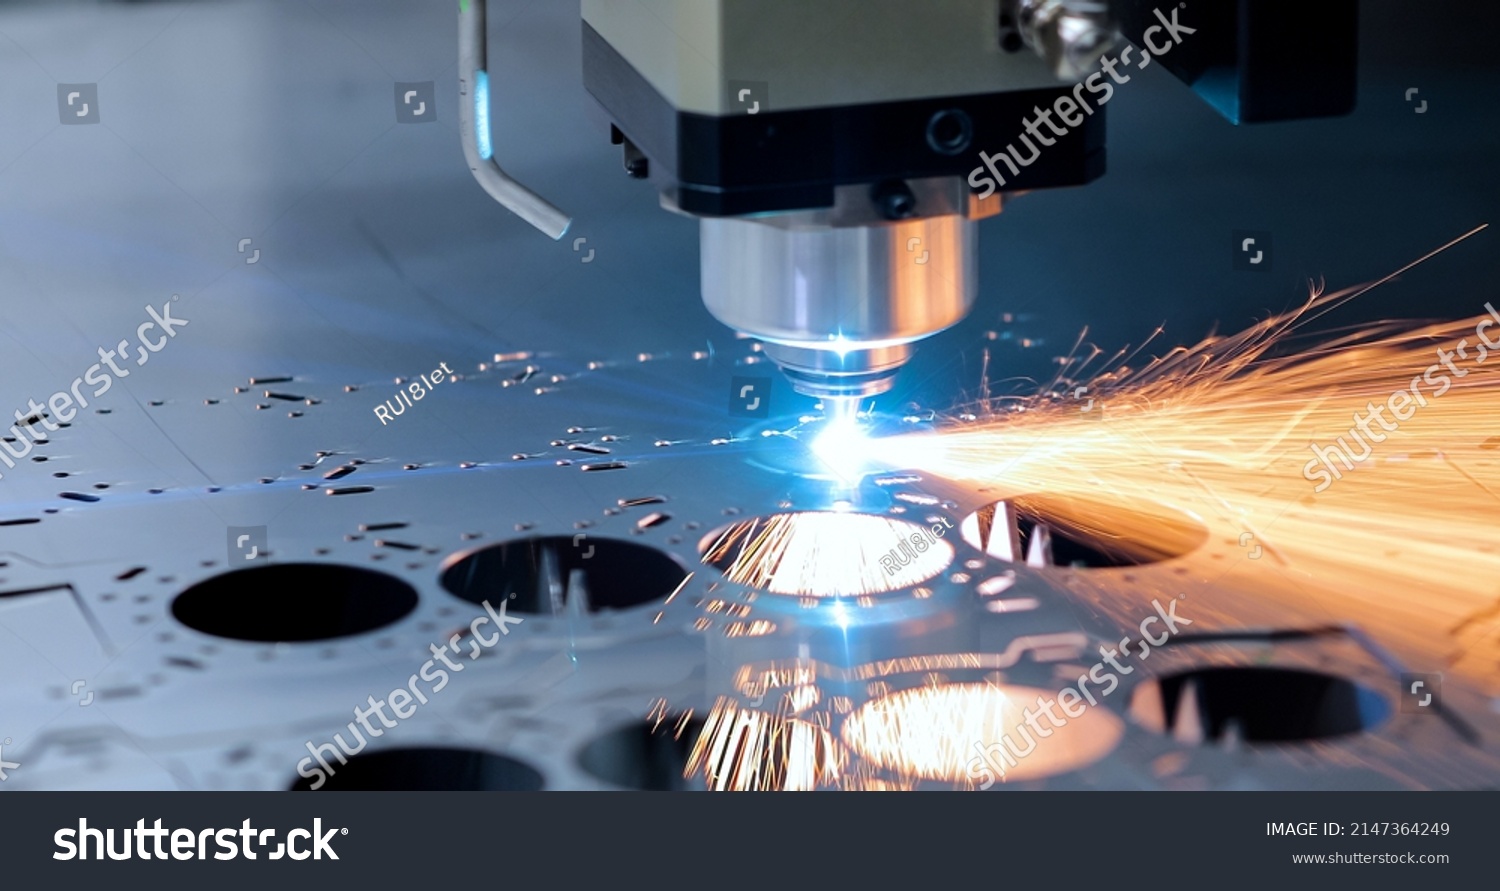 Cnc milling machine. Processing and laser cutting for metal in the industrial. Motion blur. Industrial exhibition of machine tools. #2147364249